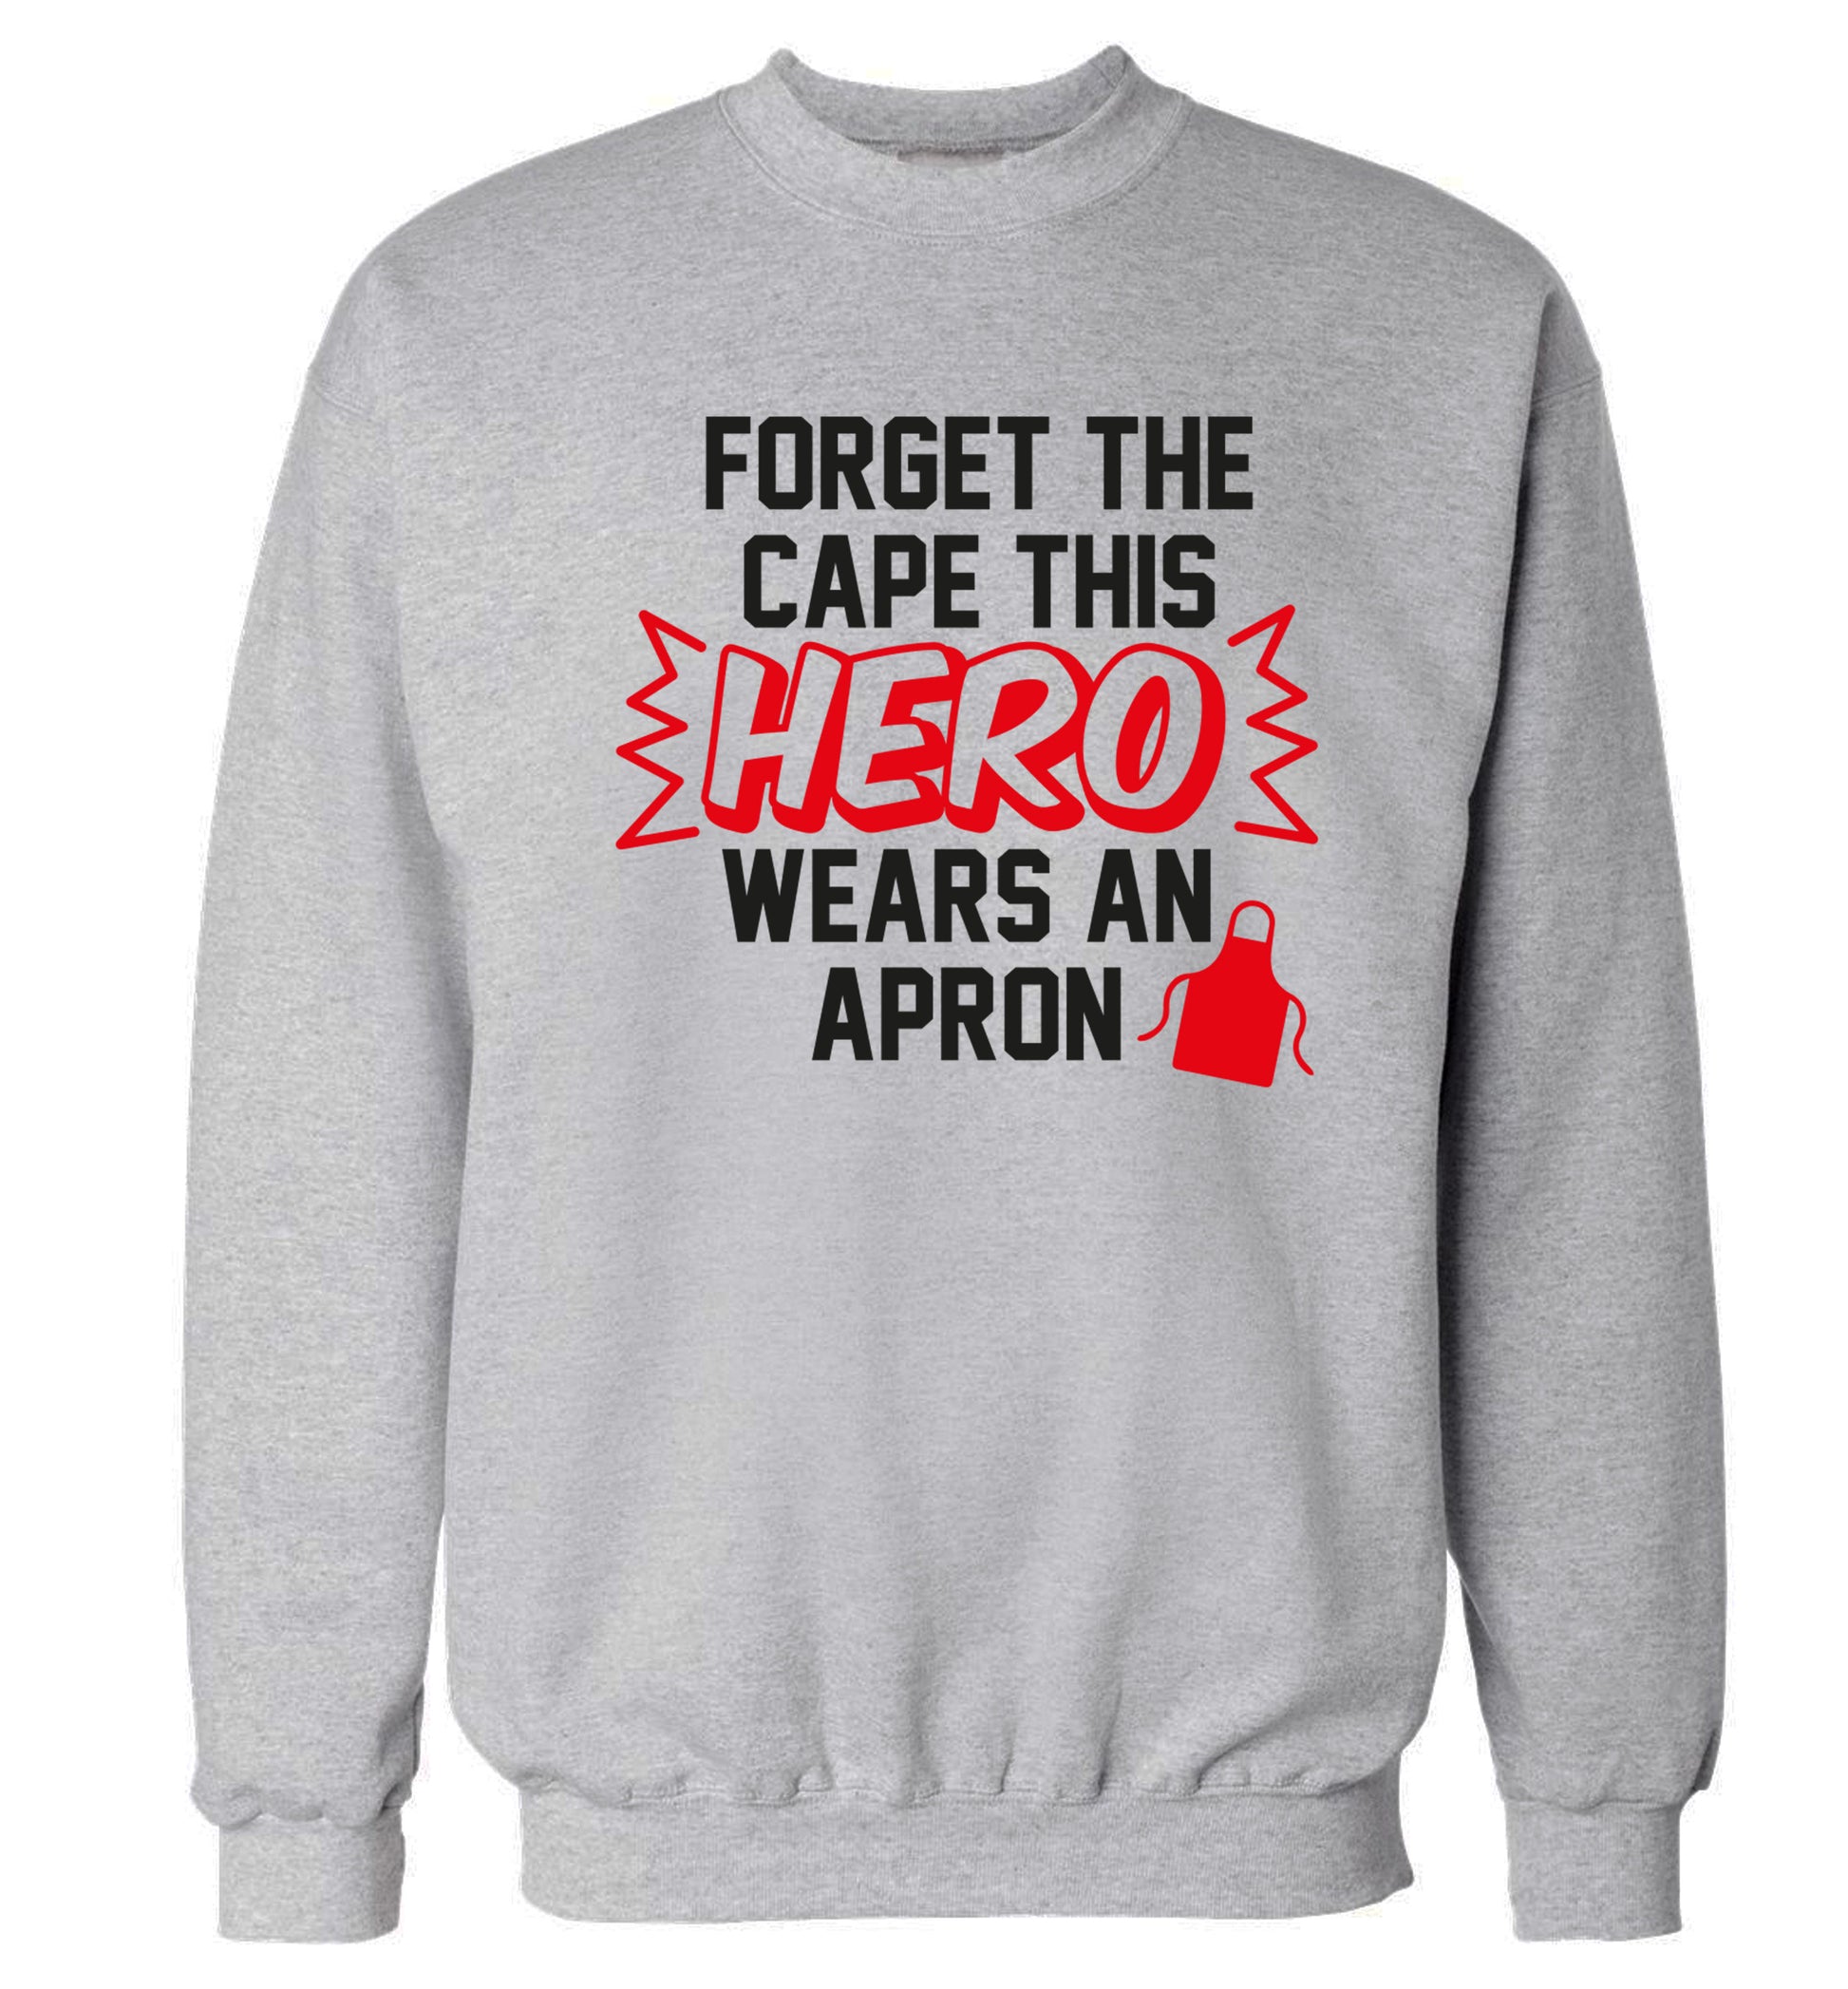 Forget the cape this hero wears an apron Adult's unisex grey Sweater 2XL